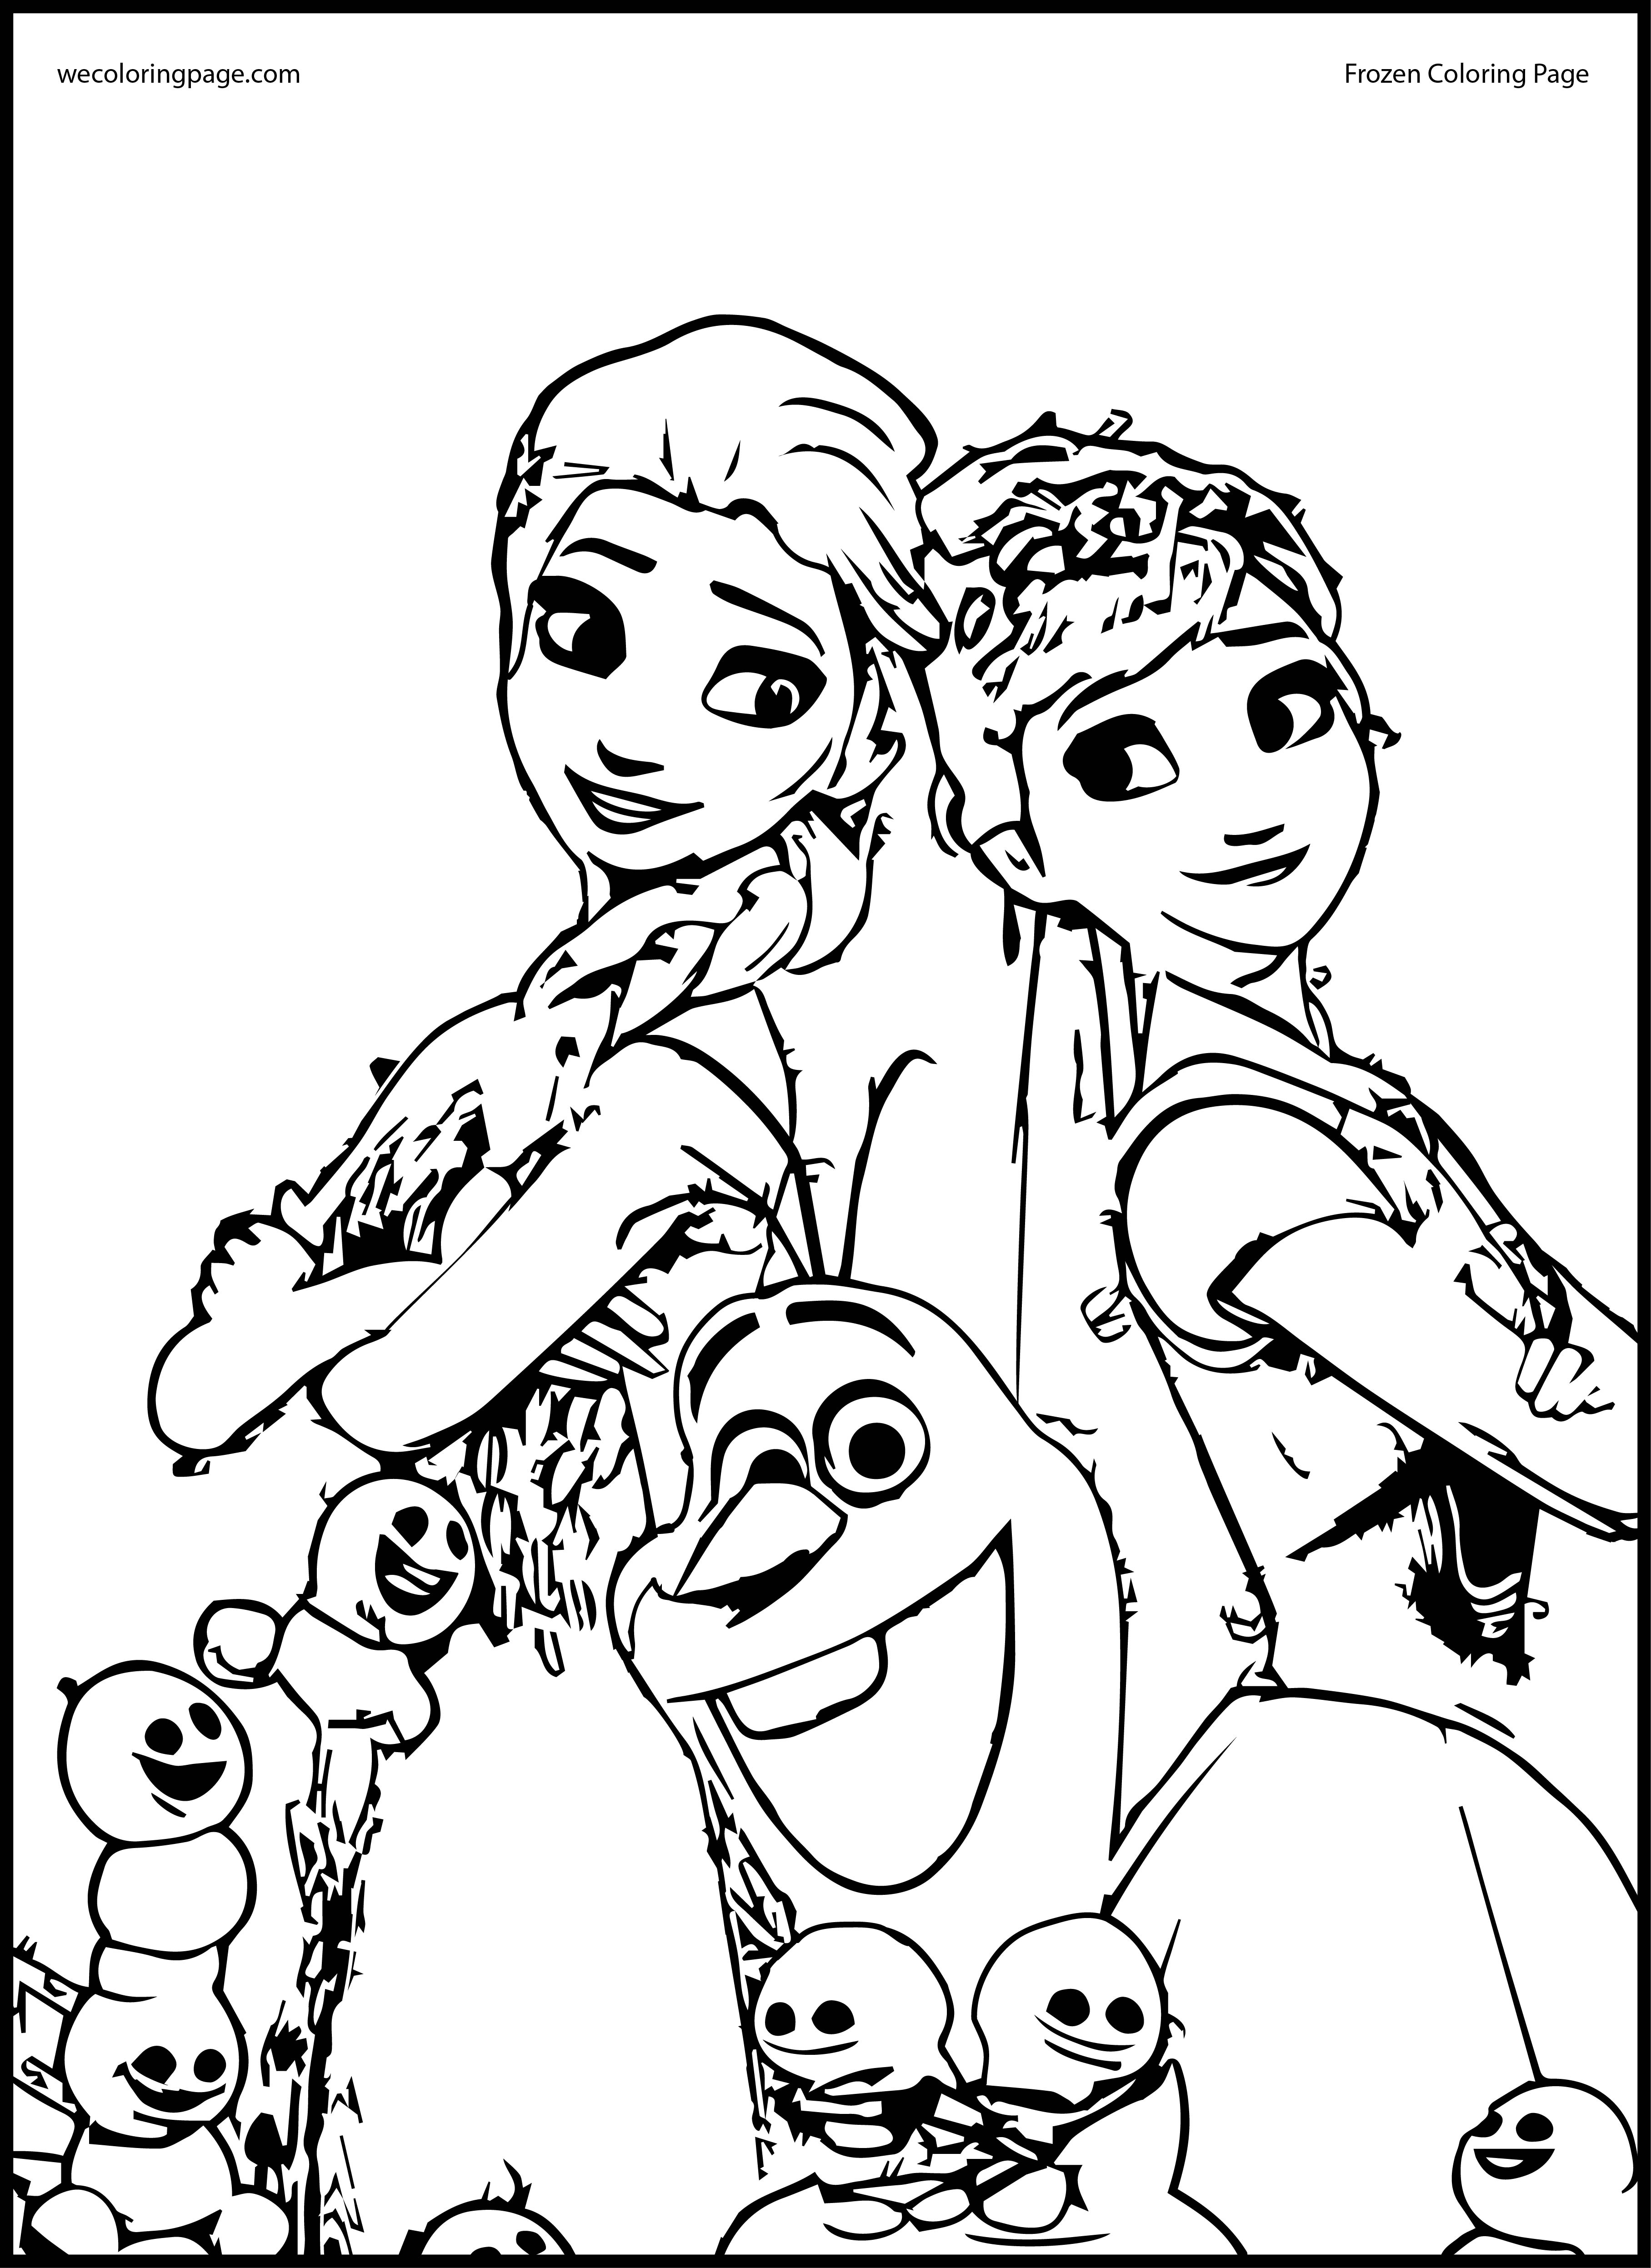 Elsa And Anna Pictures To Print And Color / 18 Frozen Printable